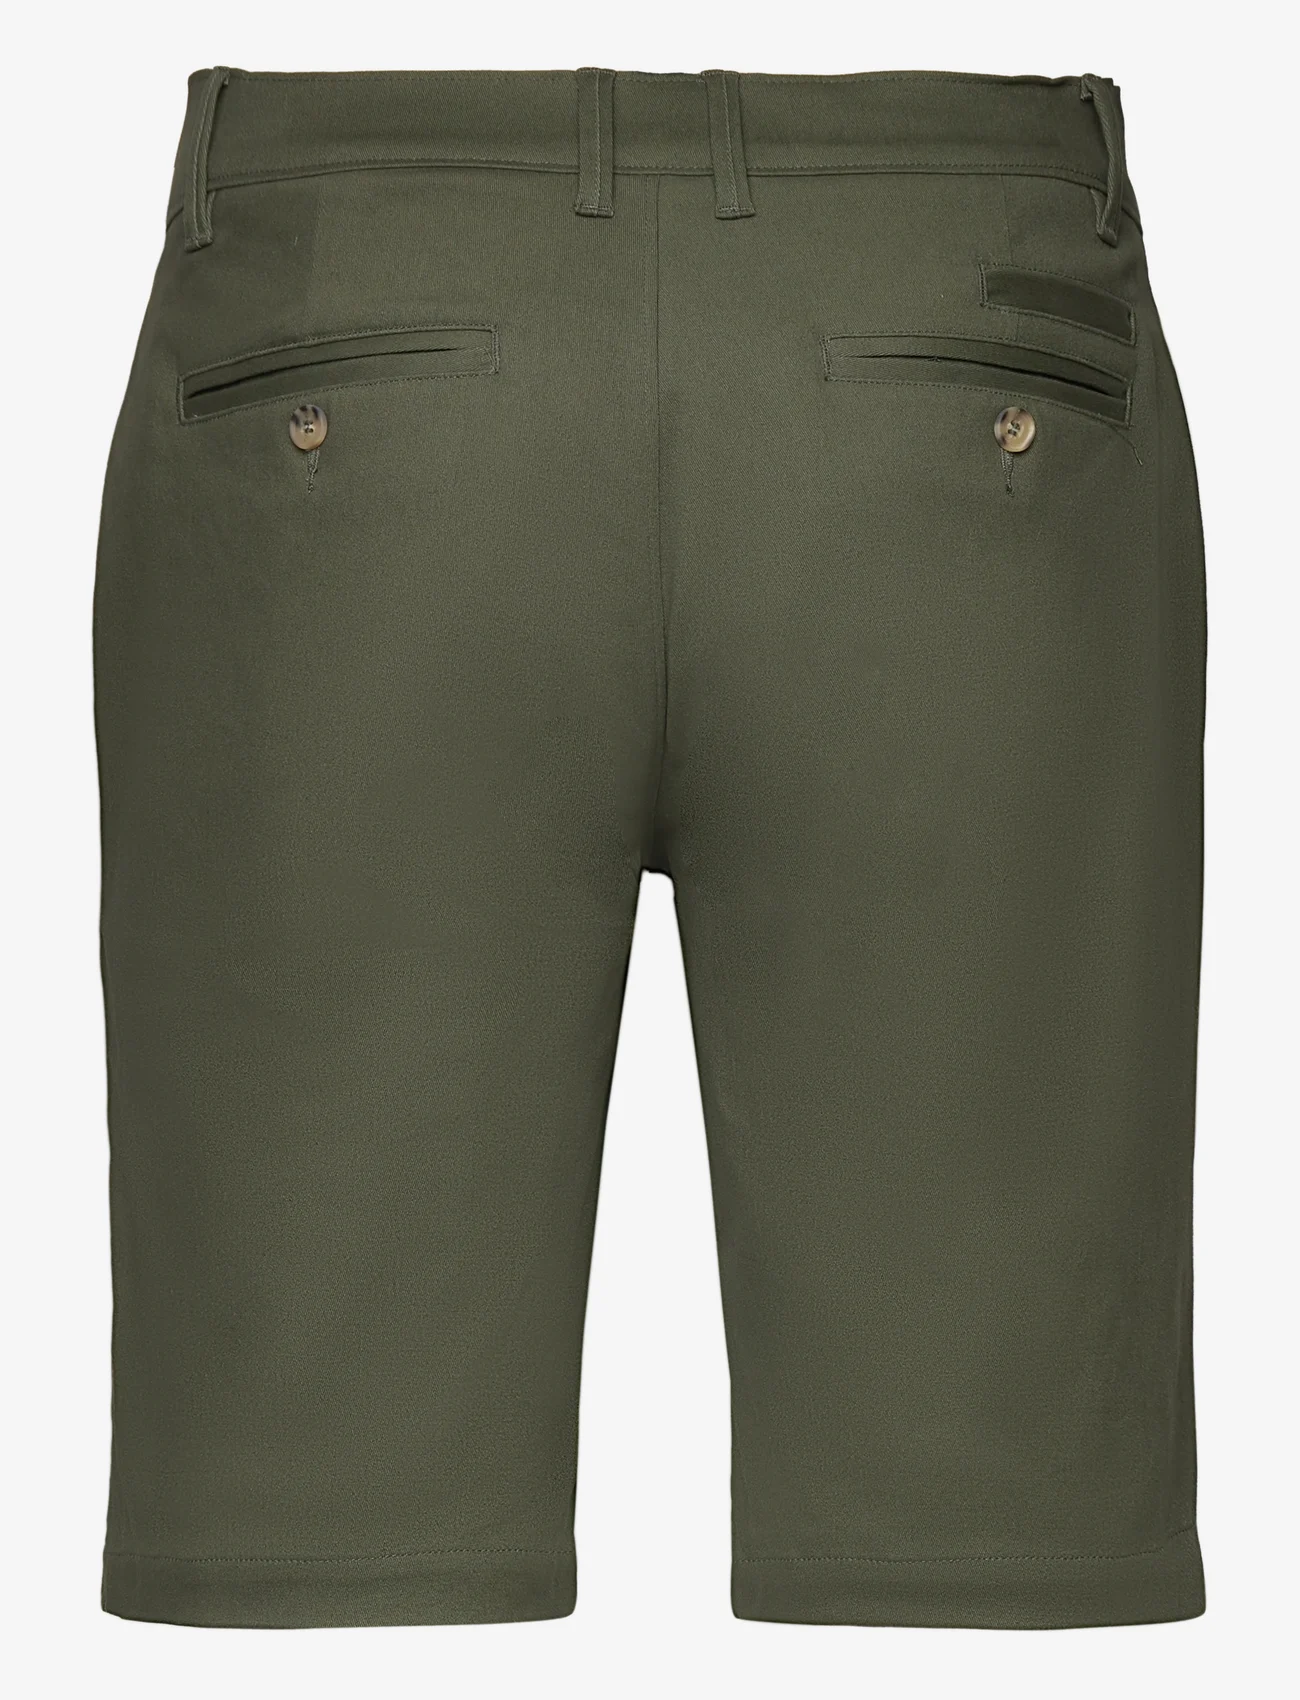 Urban Pioneers - Toby Shorts - olive - 1